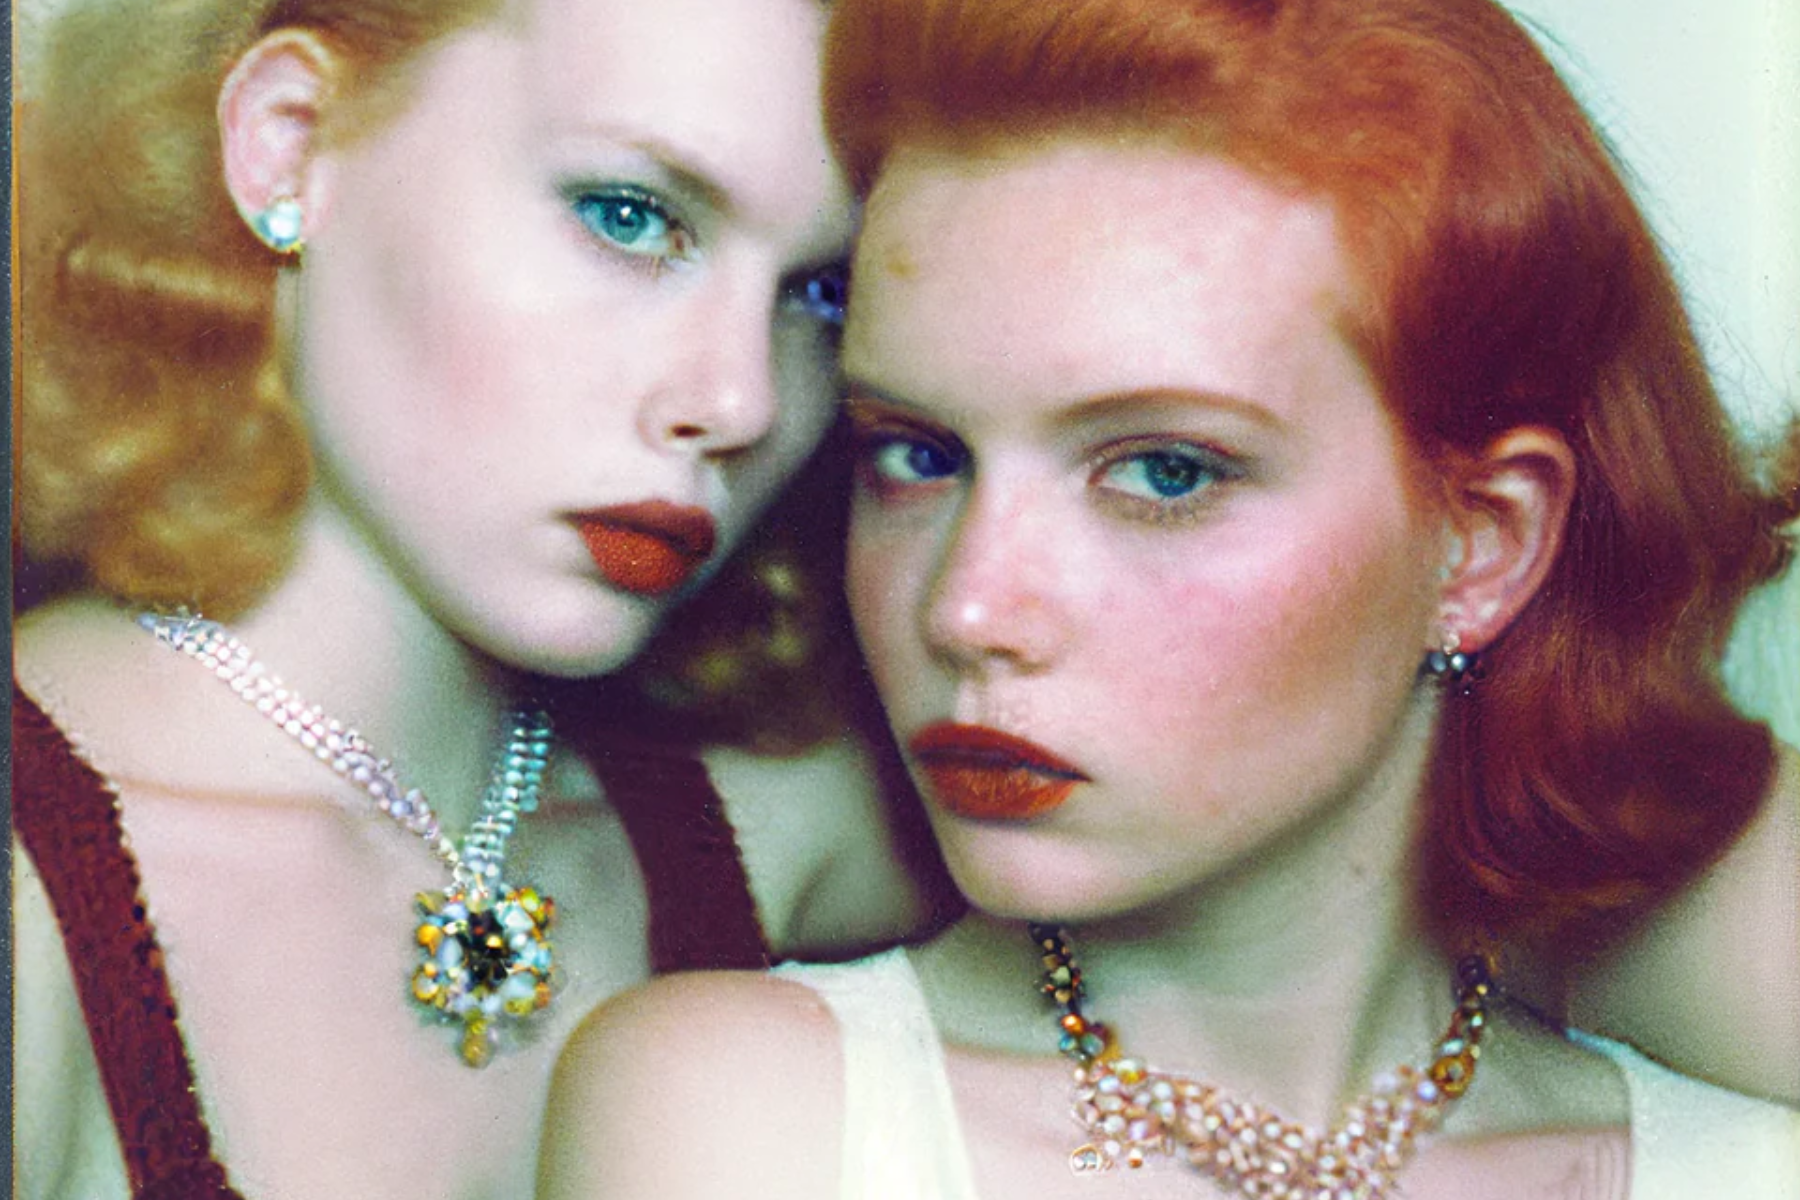 Two women are dressed in vintage necklaces and jewelry